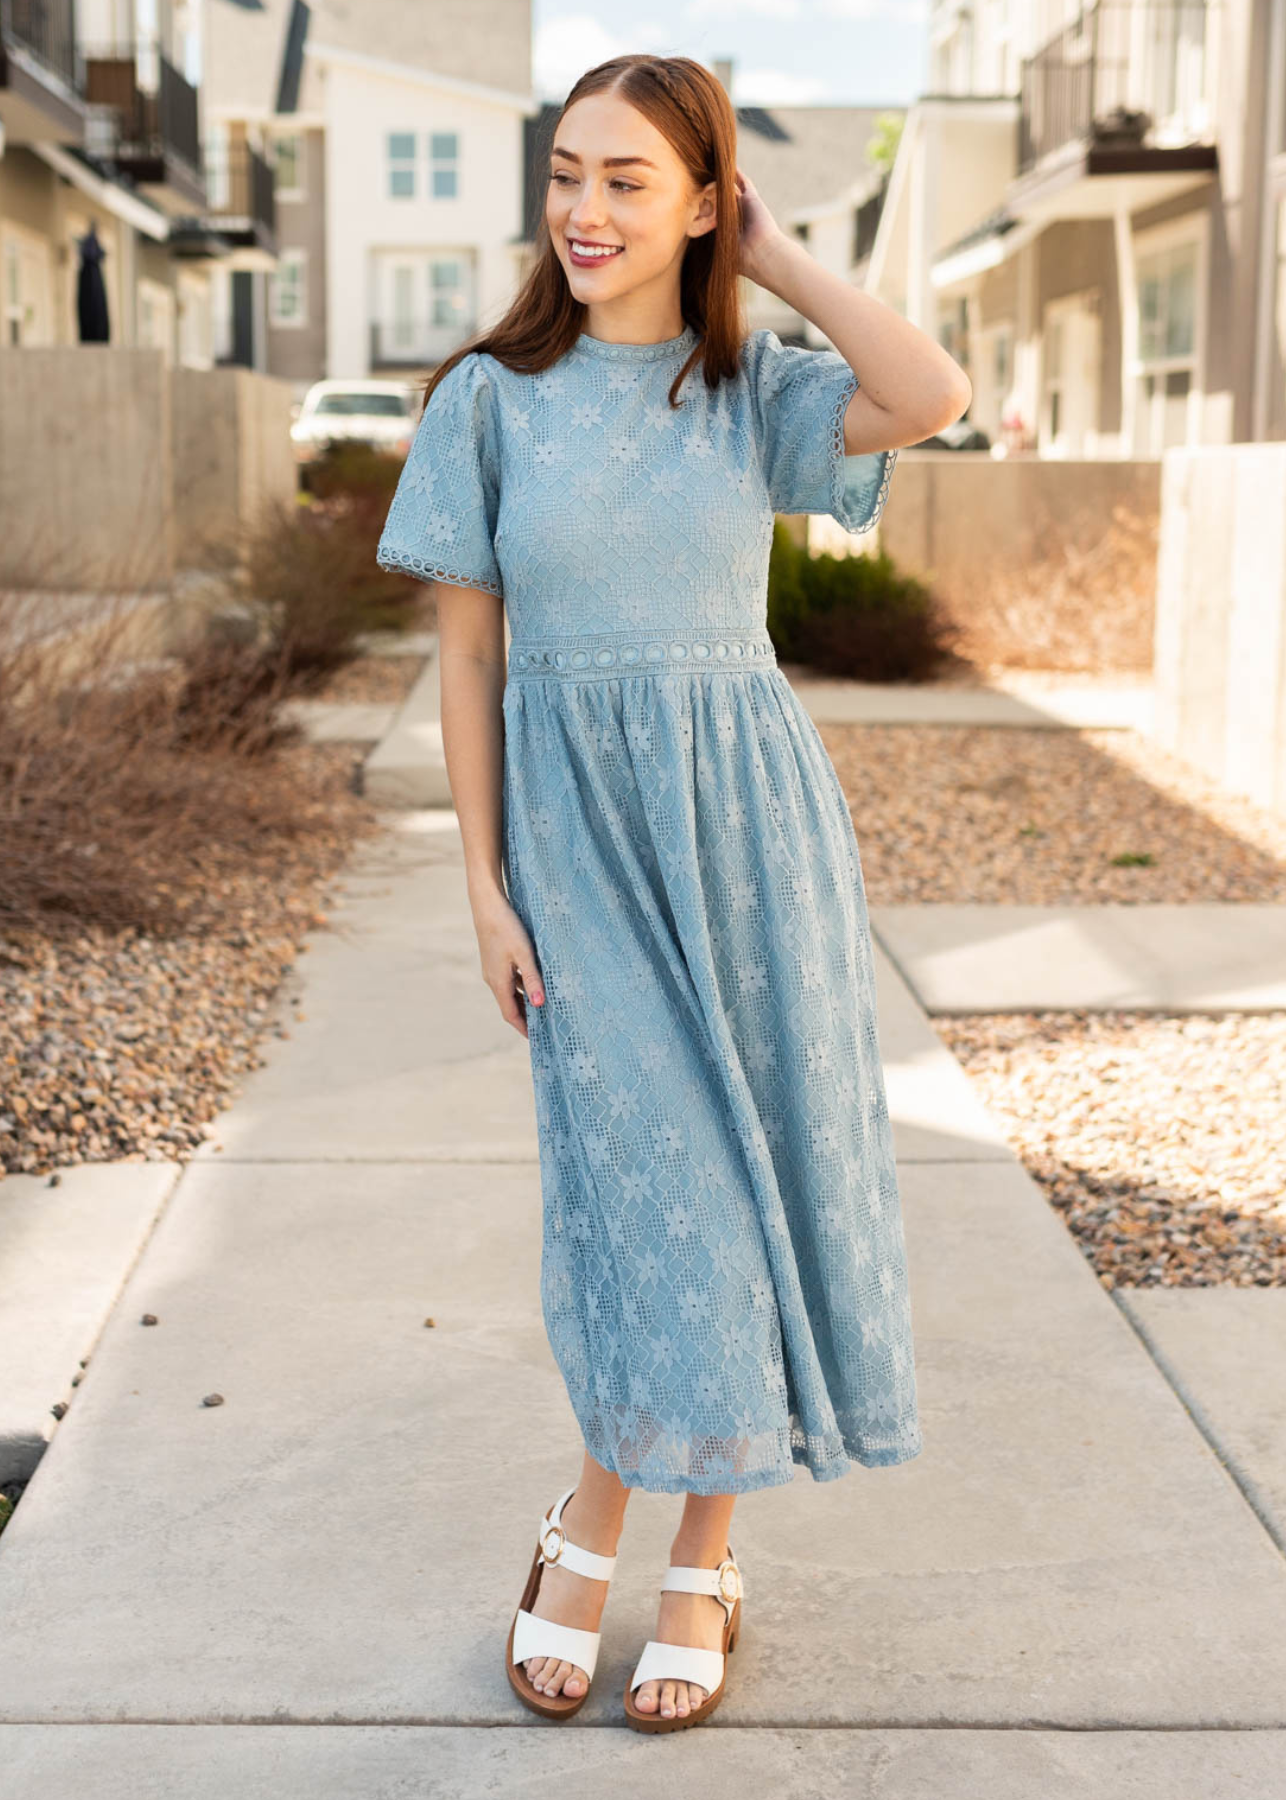 Dusty blue corded lace dress with short sleeves